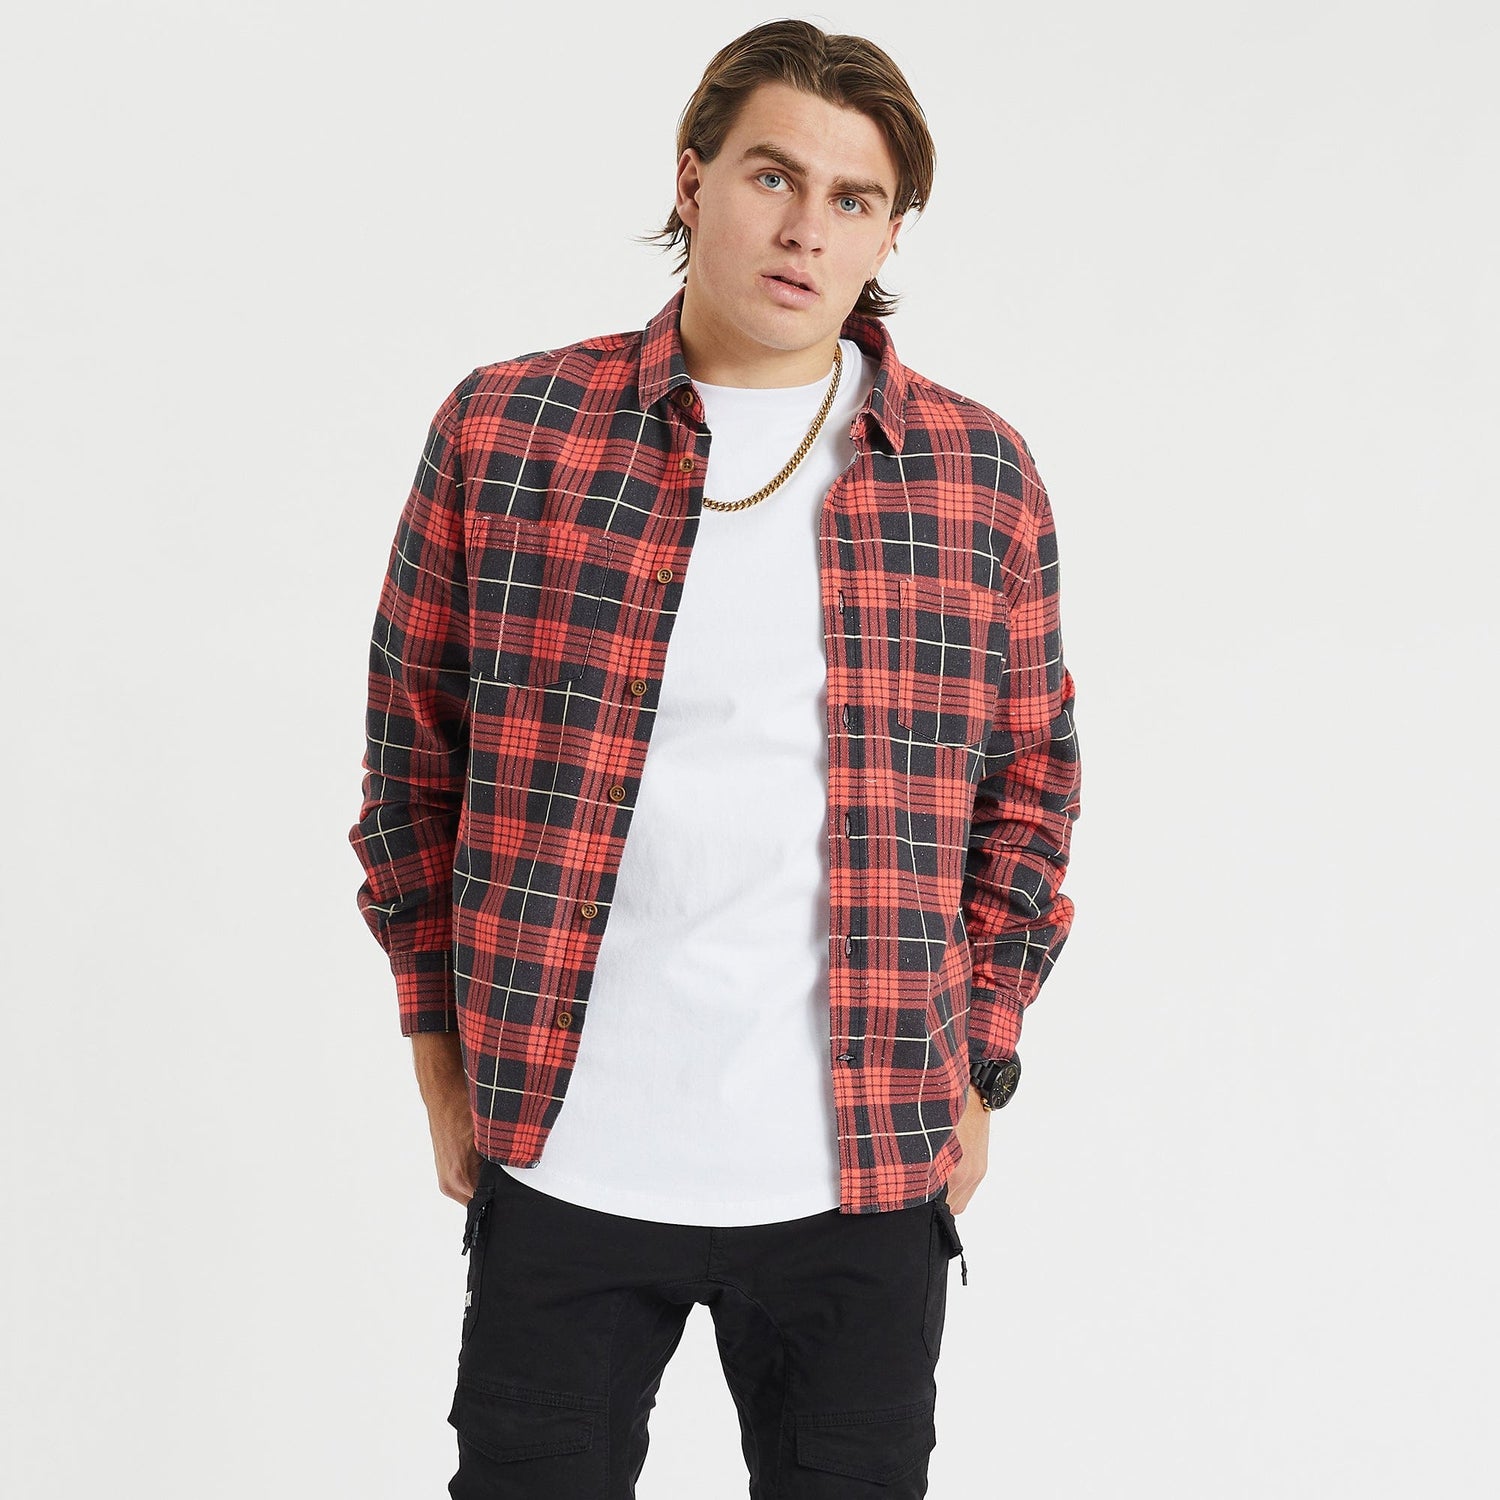 Charge Casual Long Sleeve Shirt Red Check